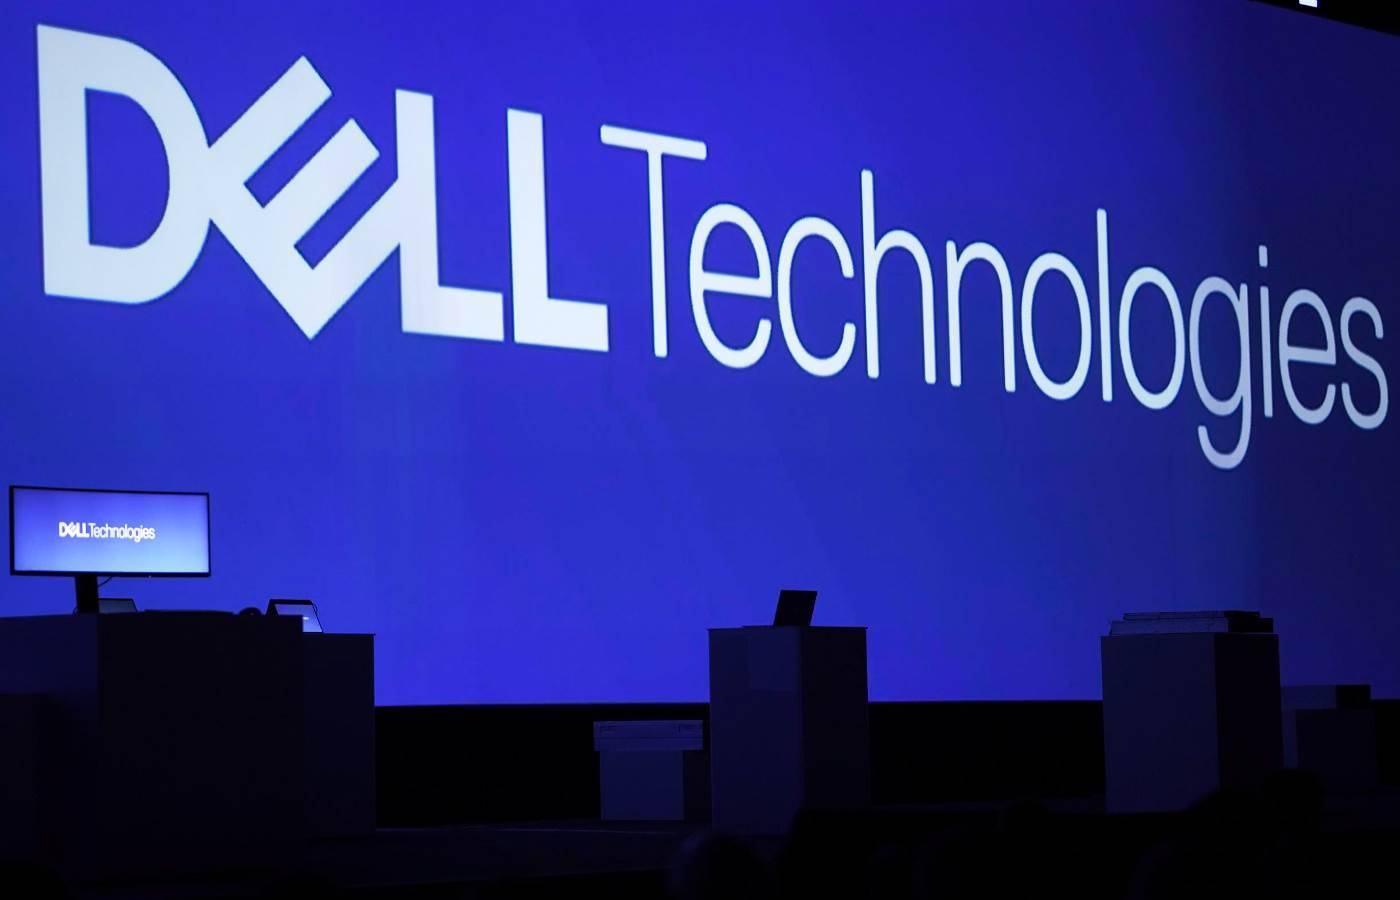 The biggest announcements at Dell Technologies World Servers